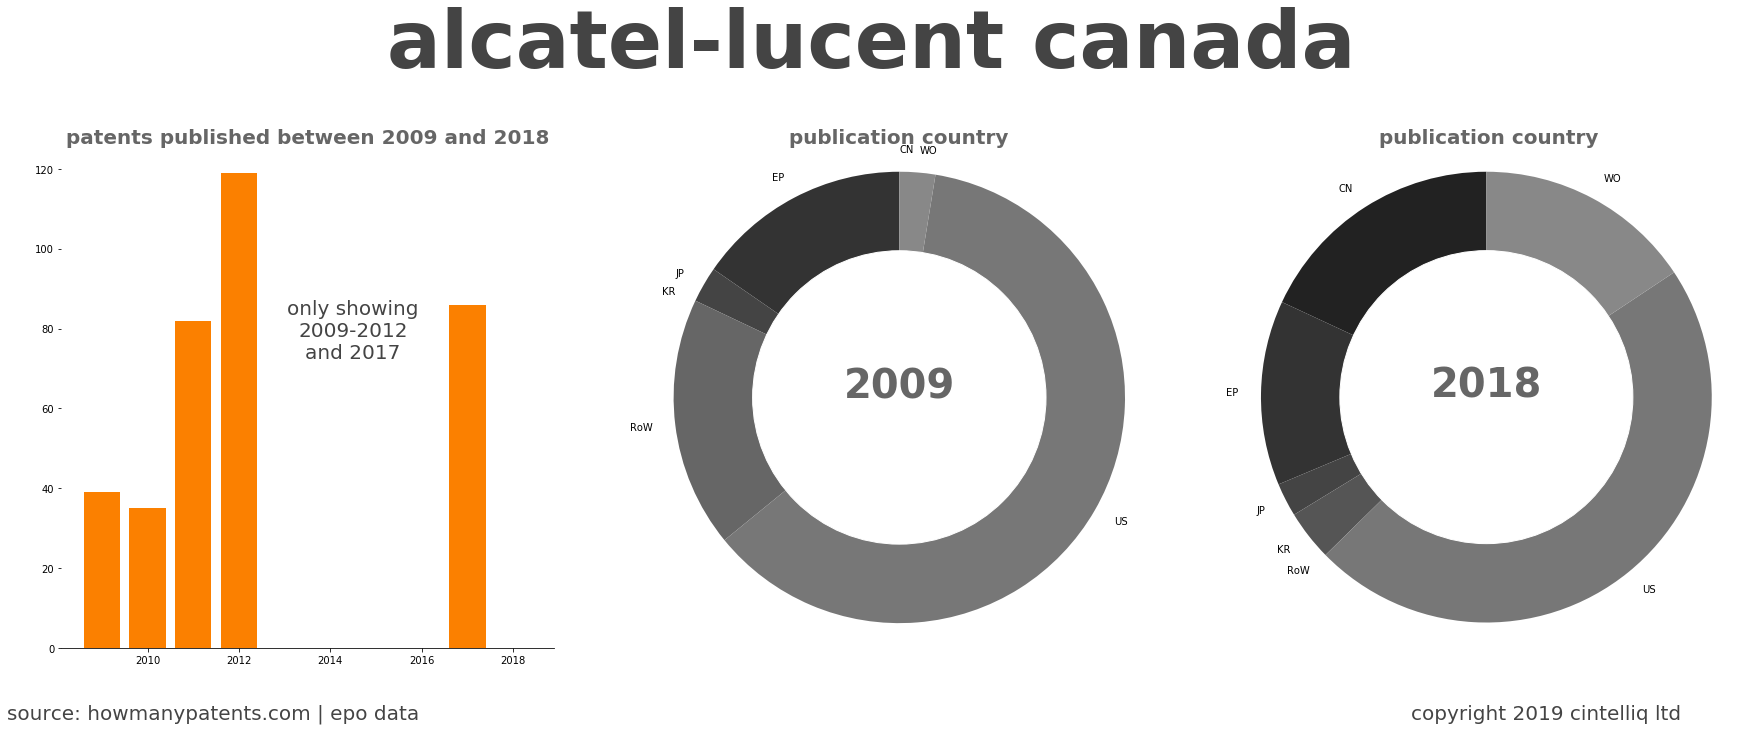 summary of patents for Alcatel-Lucent Canada